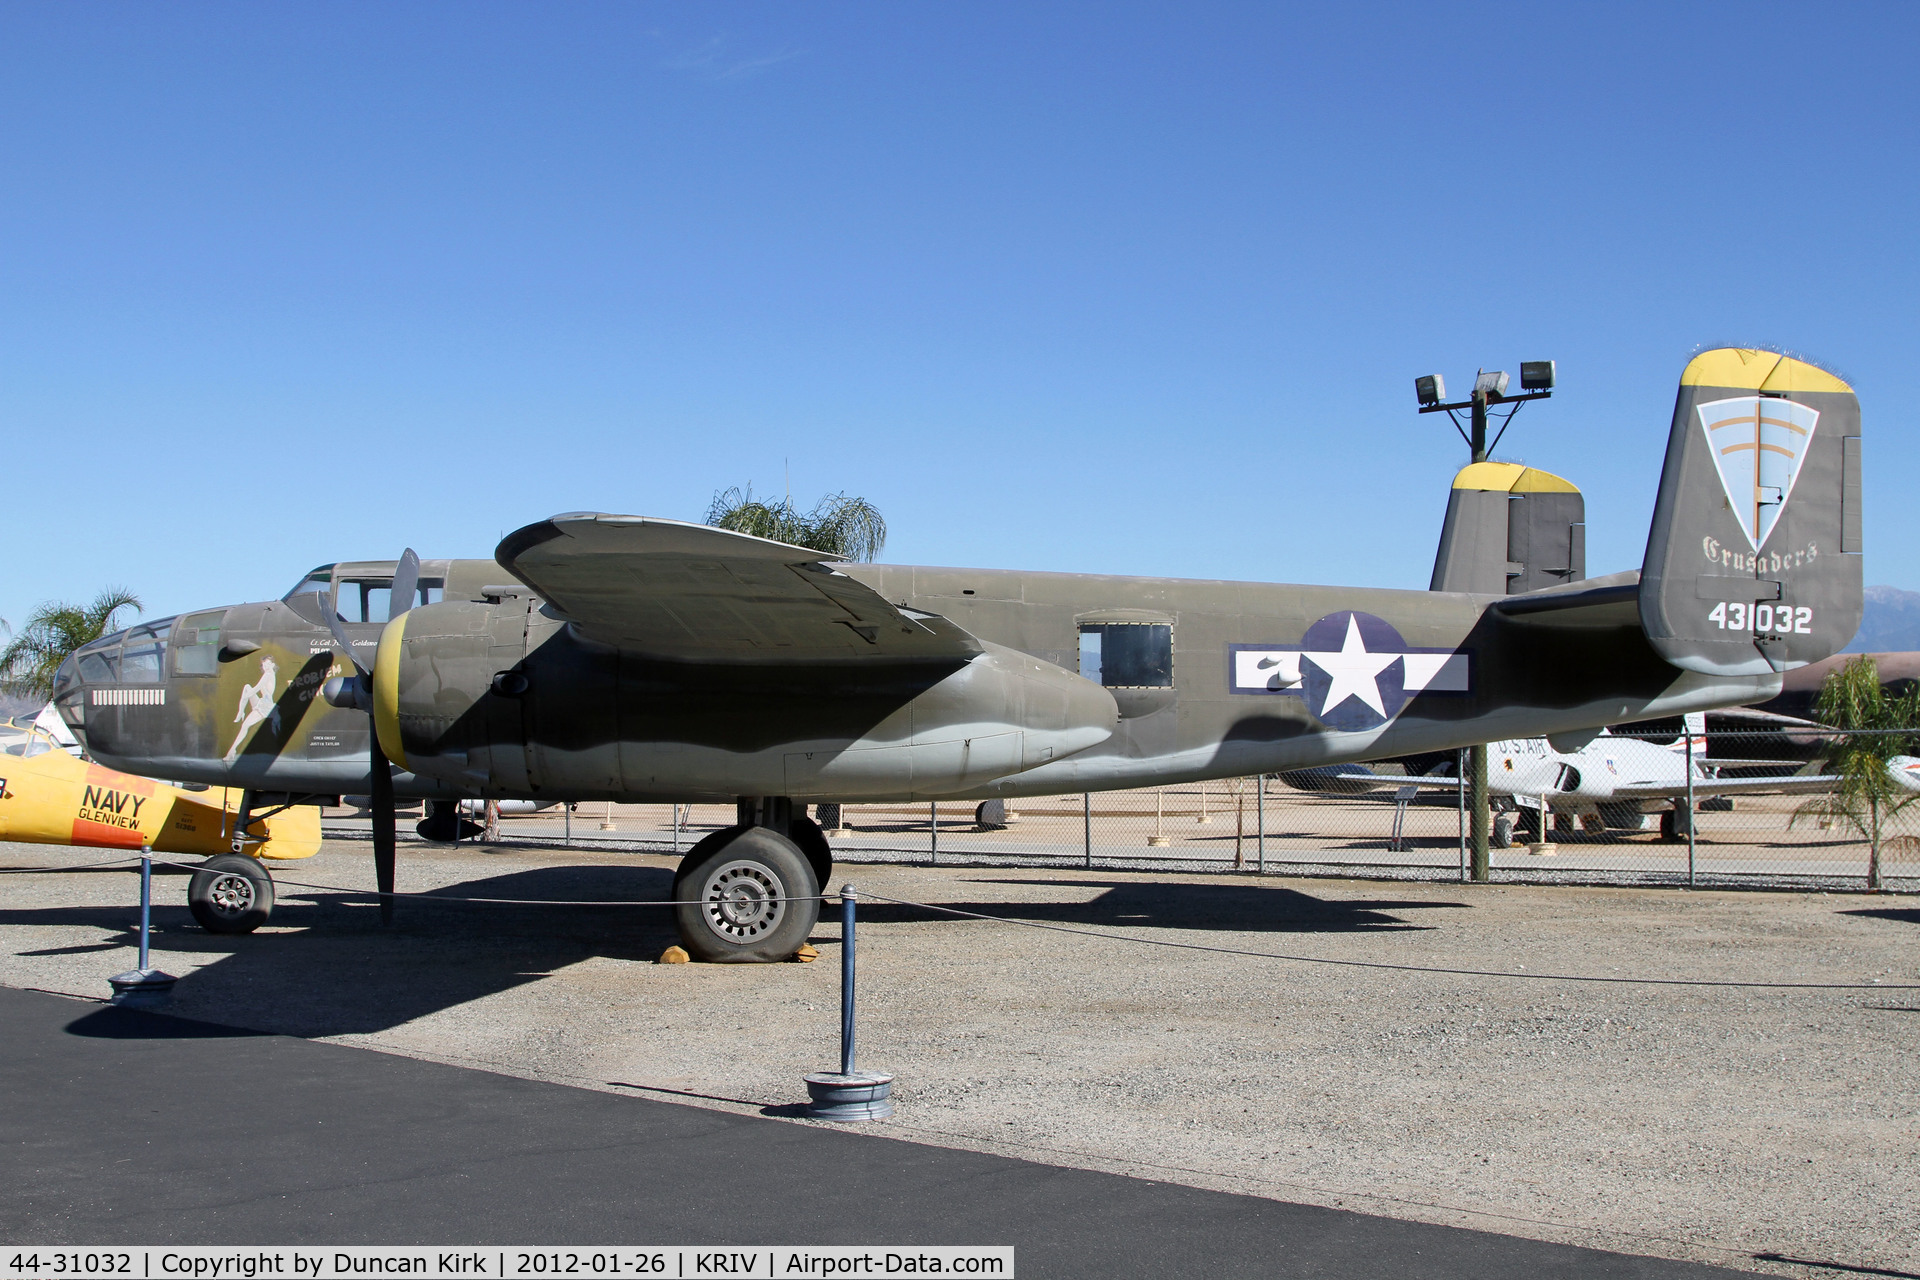 44-31032, 1944 North American B-25J Mitchell Mitchell C/N 108-35357, The museum is well worth the visit